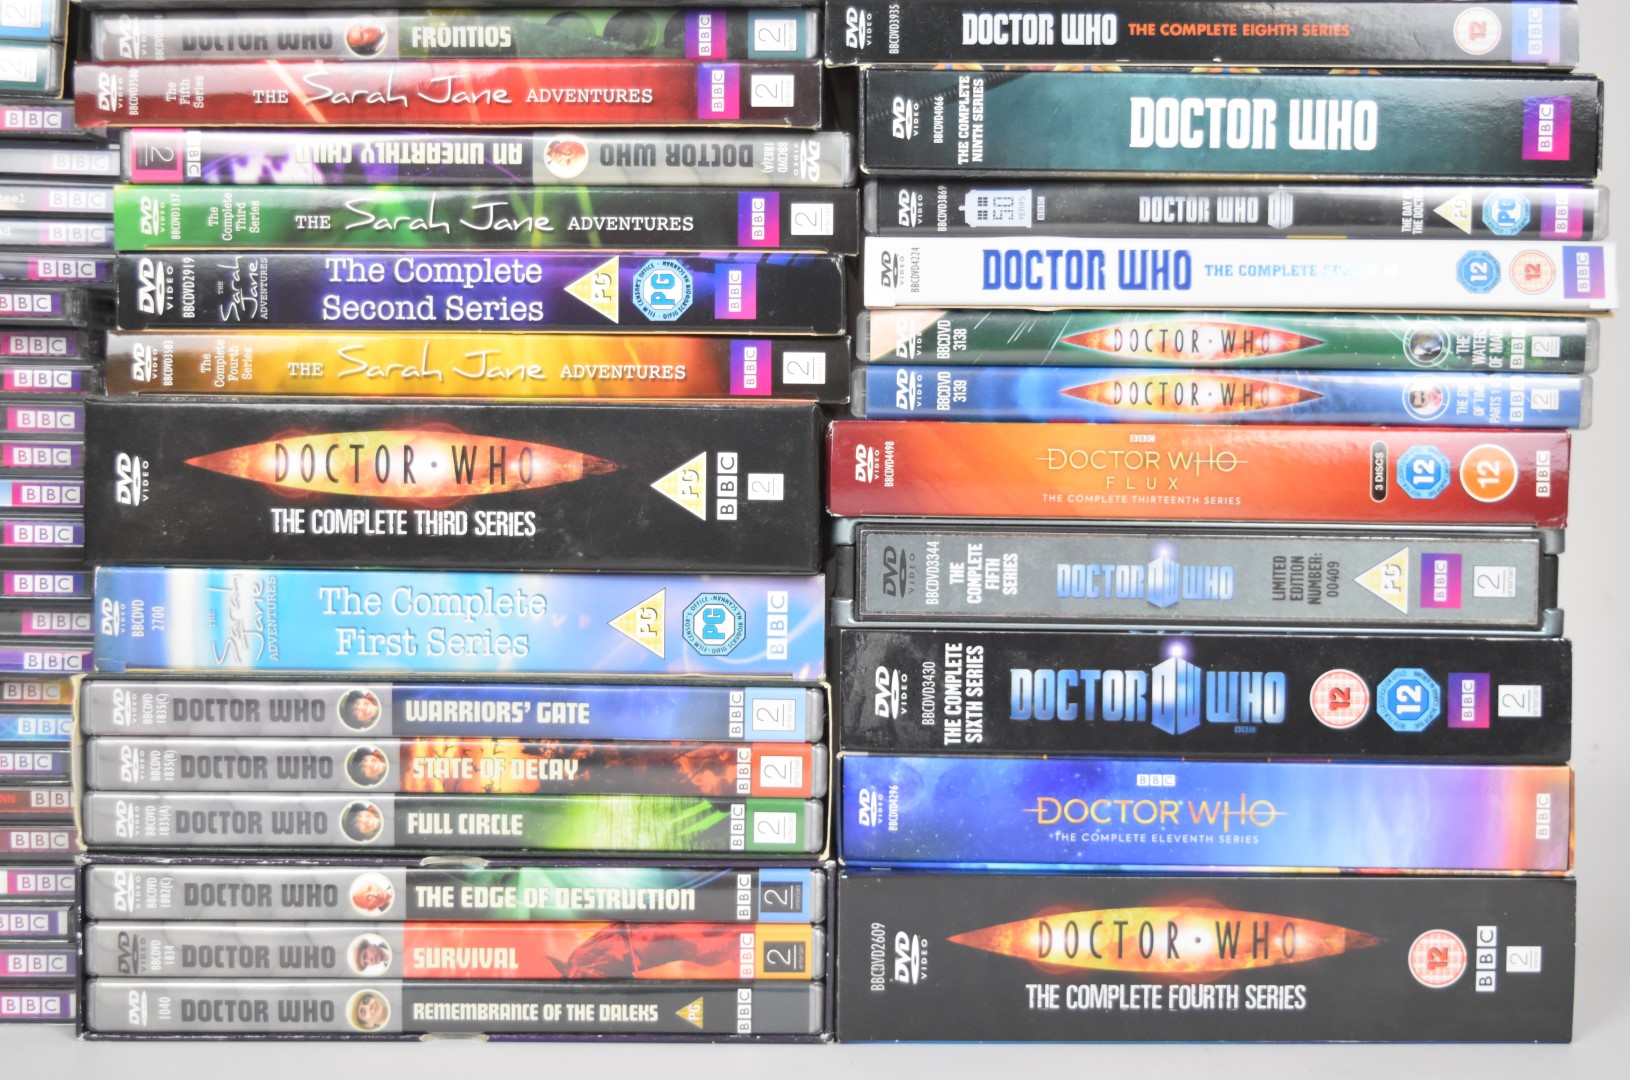 Forty-seven Doctor Who multi disc DVD boxed sets including TV specials and related titles, - Image 4 of 6